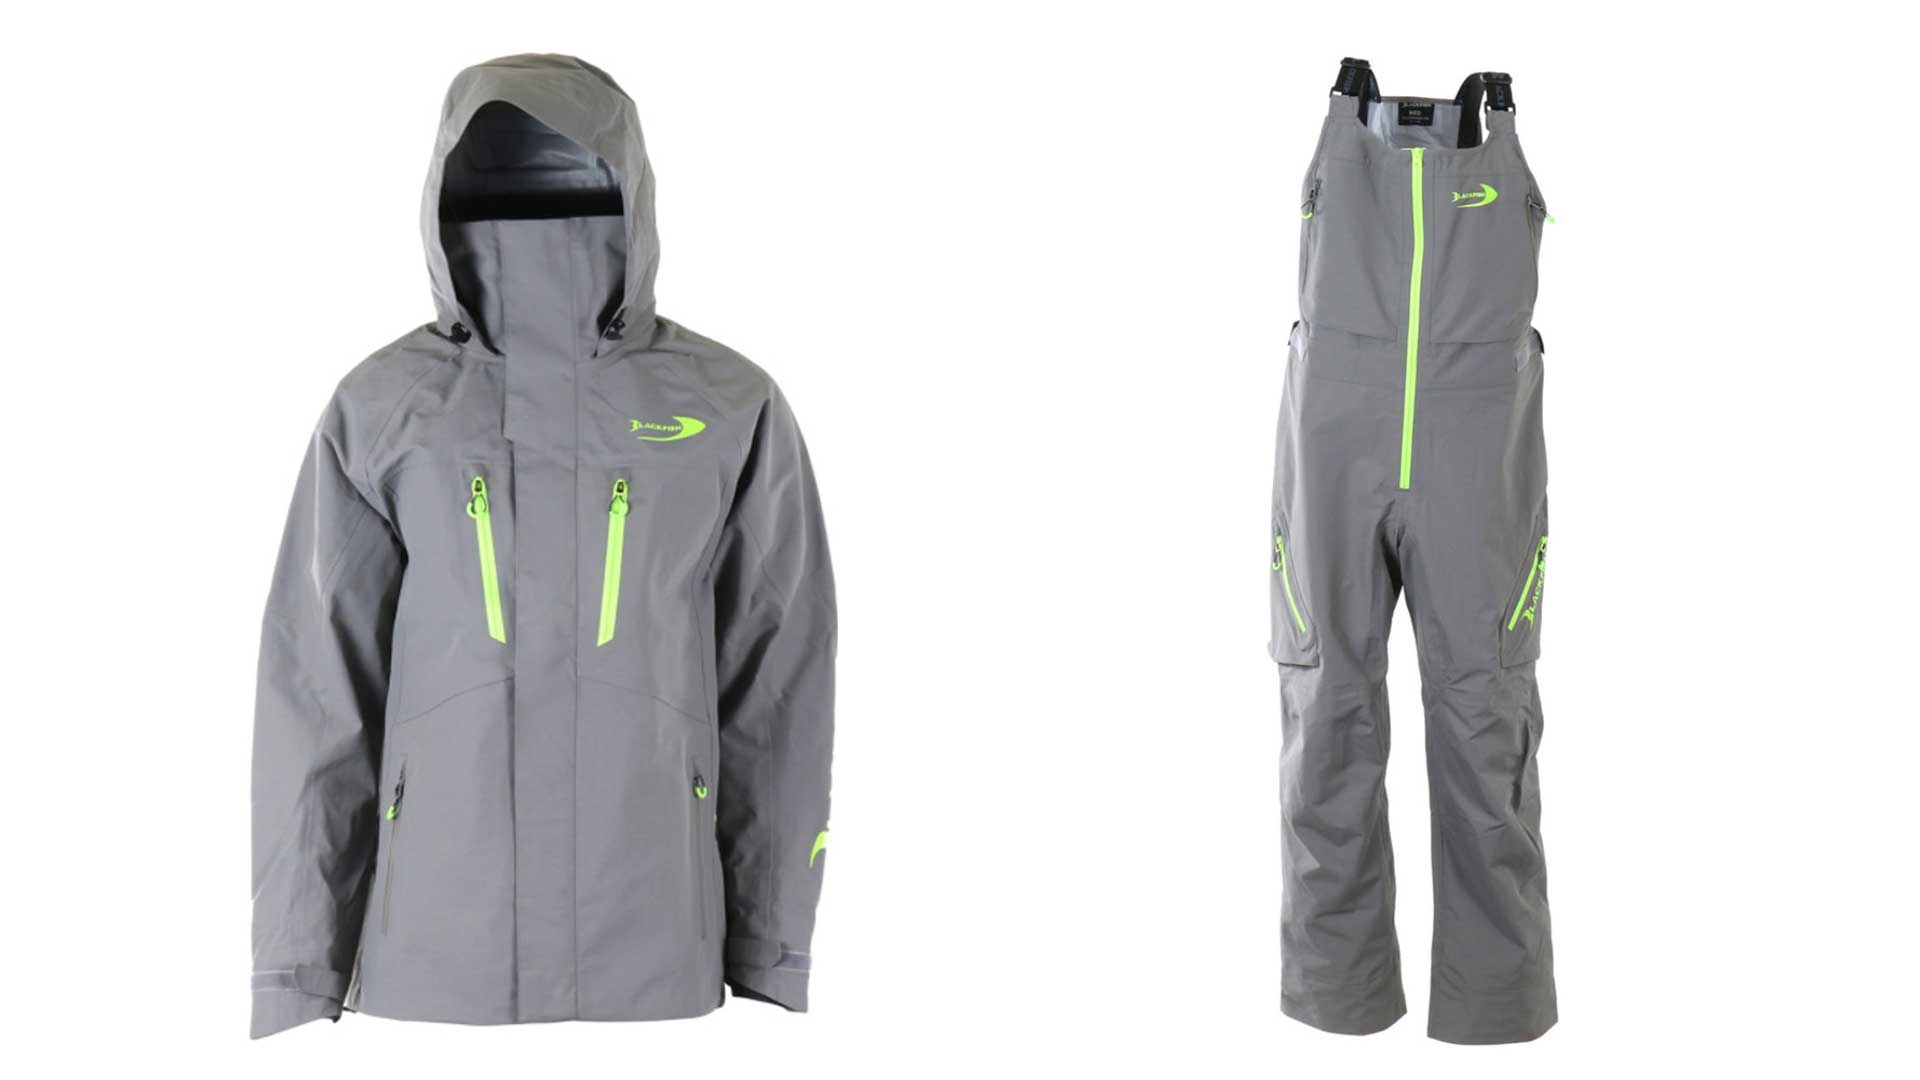 Blackfish Gear - A rain suit looks like could come in